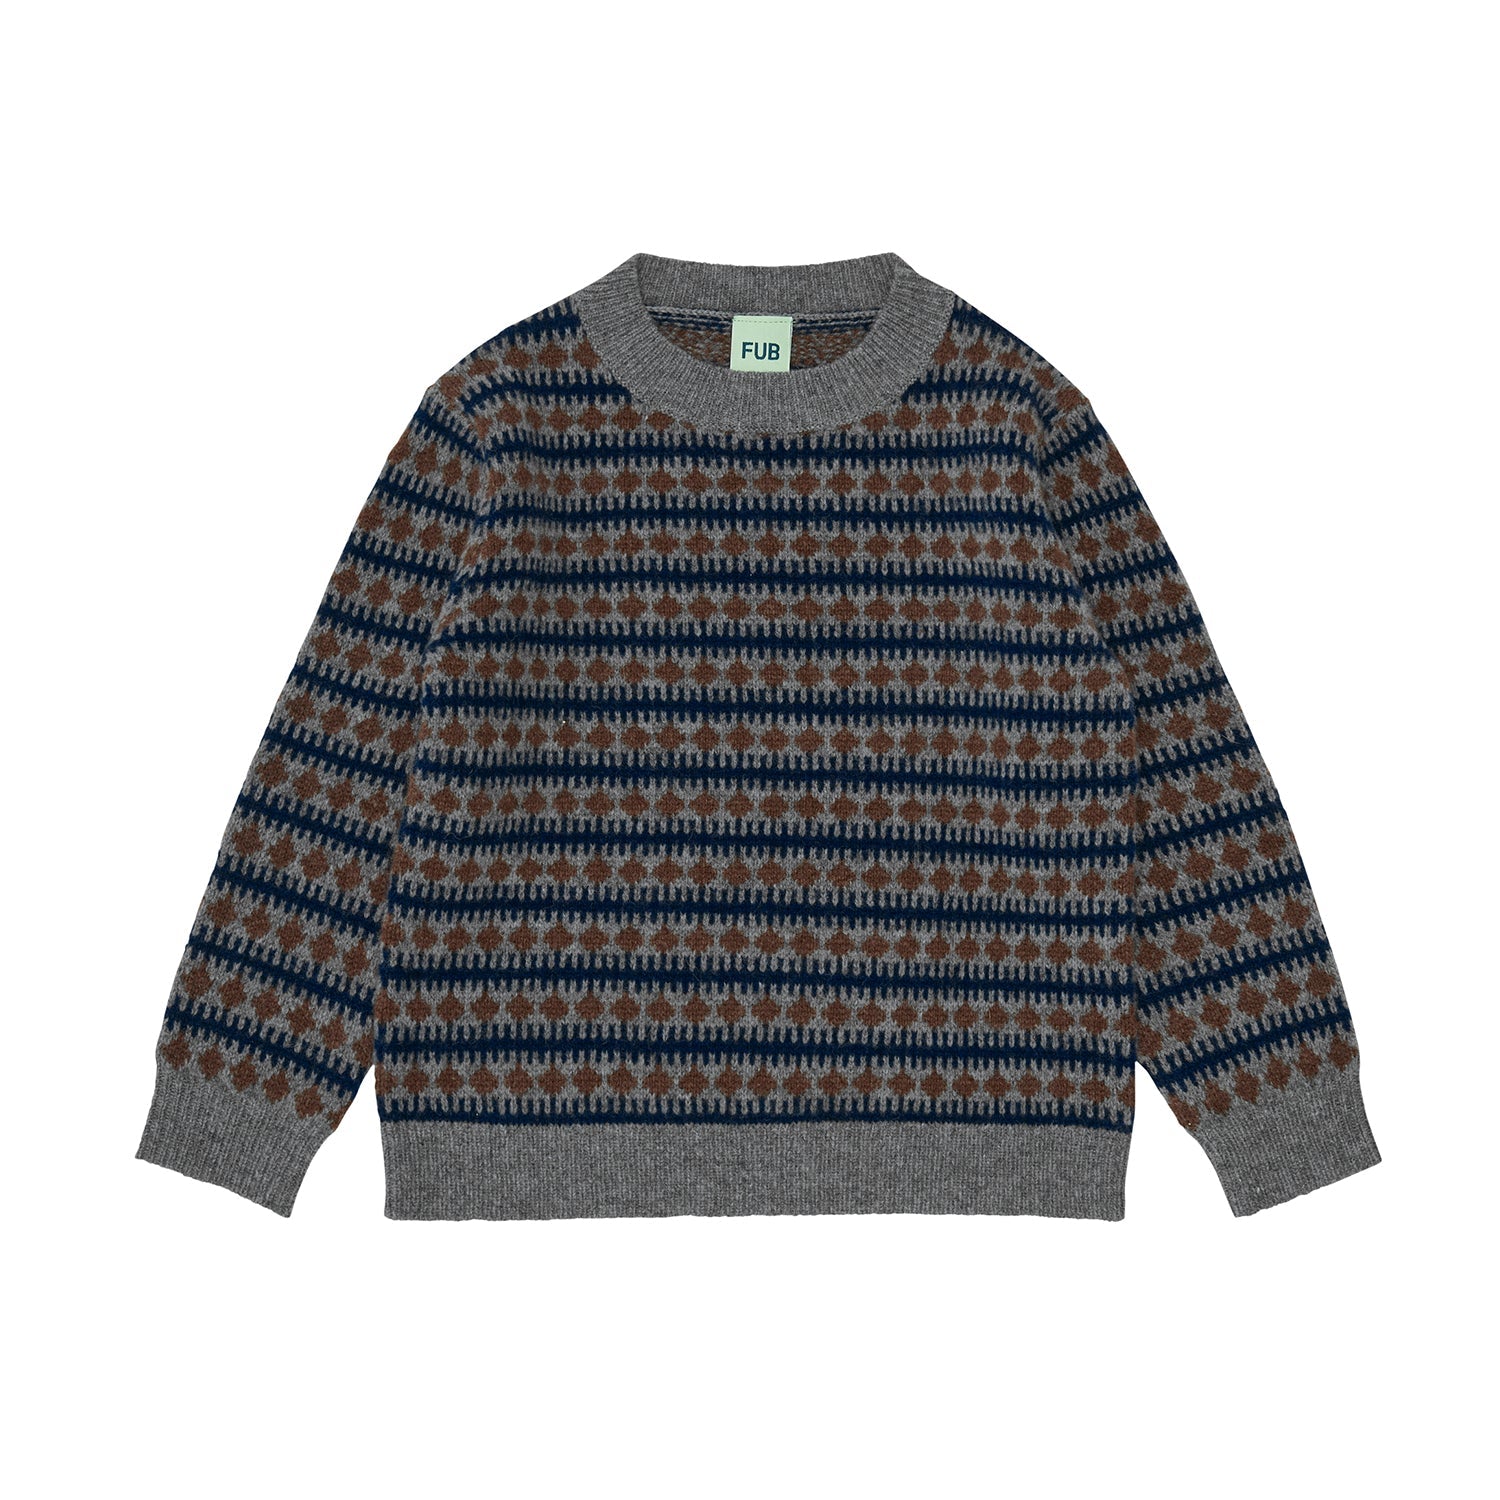 Fub Grey with Multicolor Wool Sweater